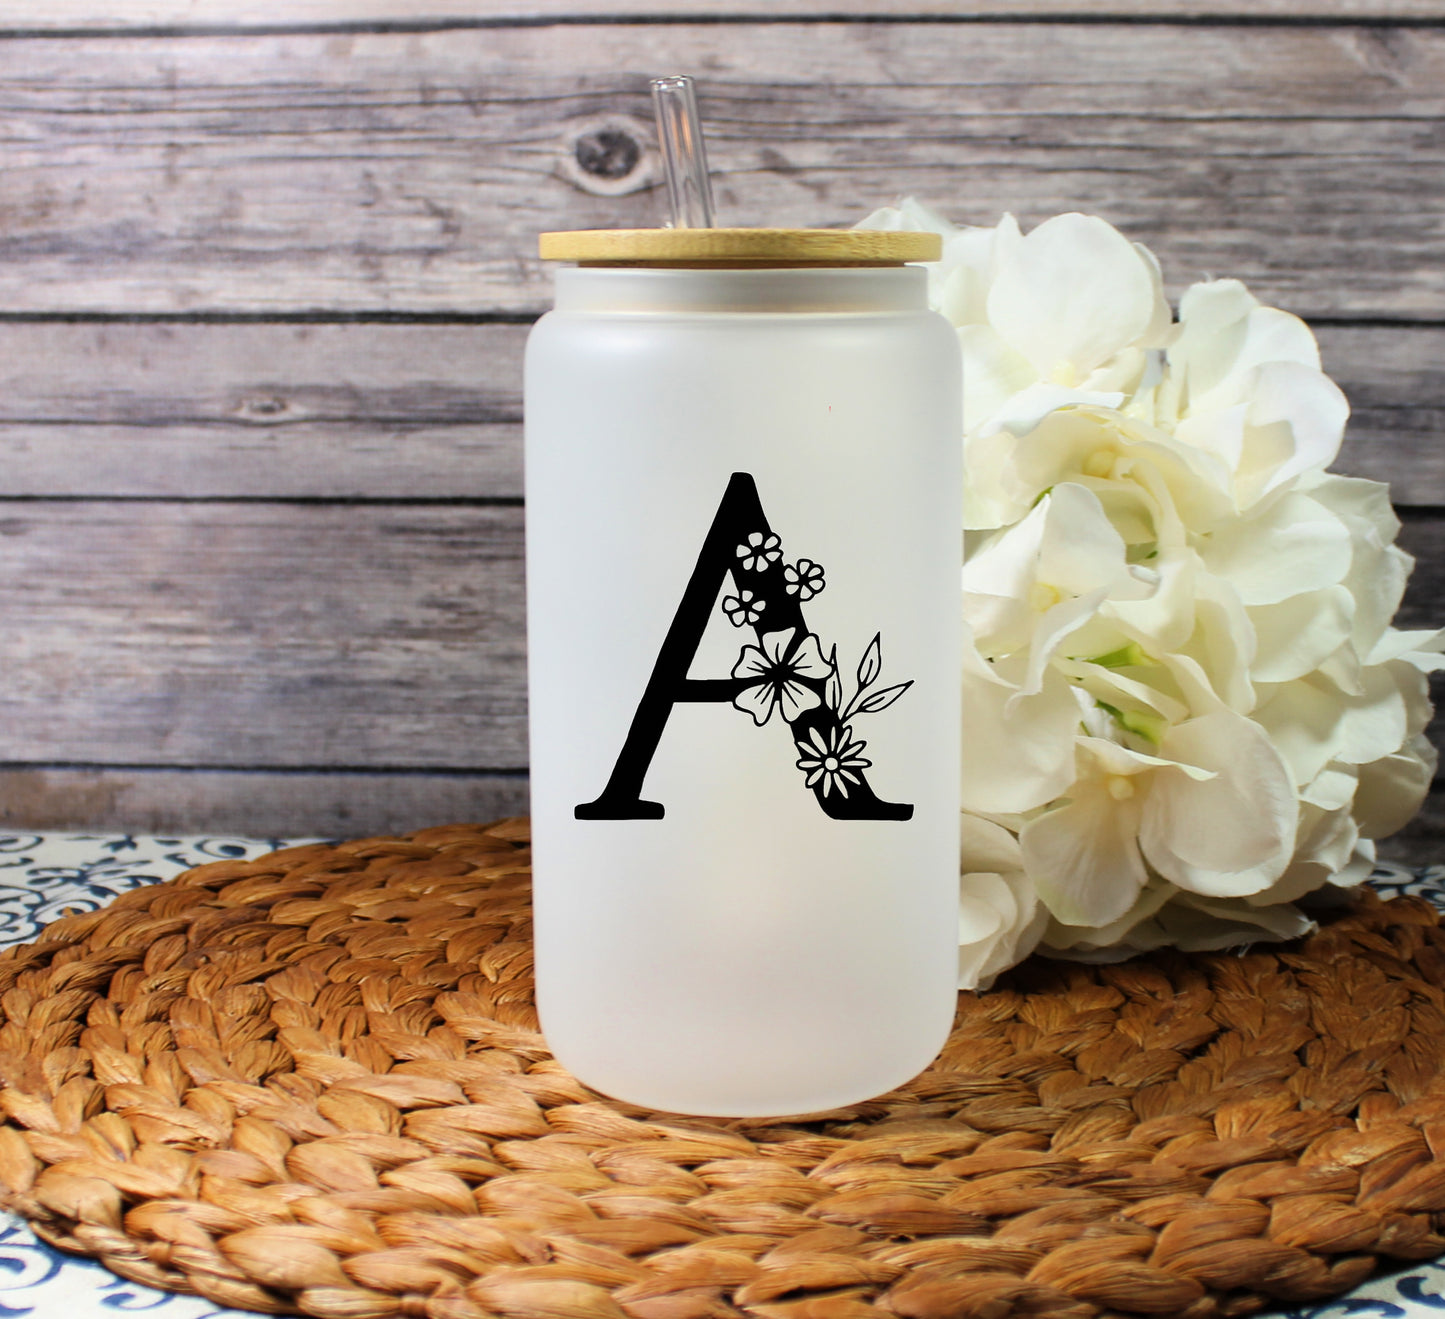 16 oz. Frosted Iced Coffee Cup , Personalized Monogrammed Iced Coffee Cup With Name, Birthday Gift, Bridesmaid Cup